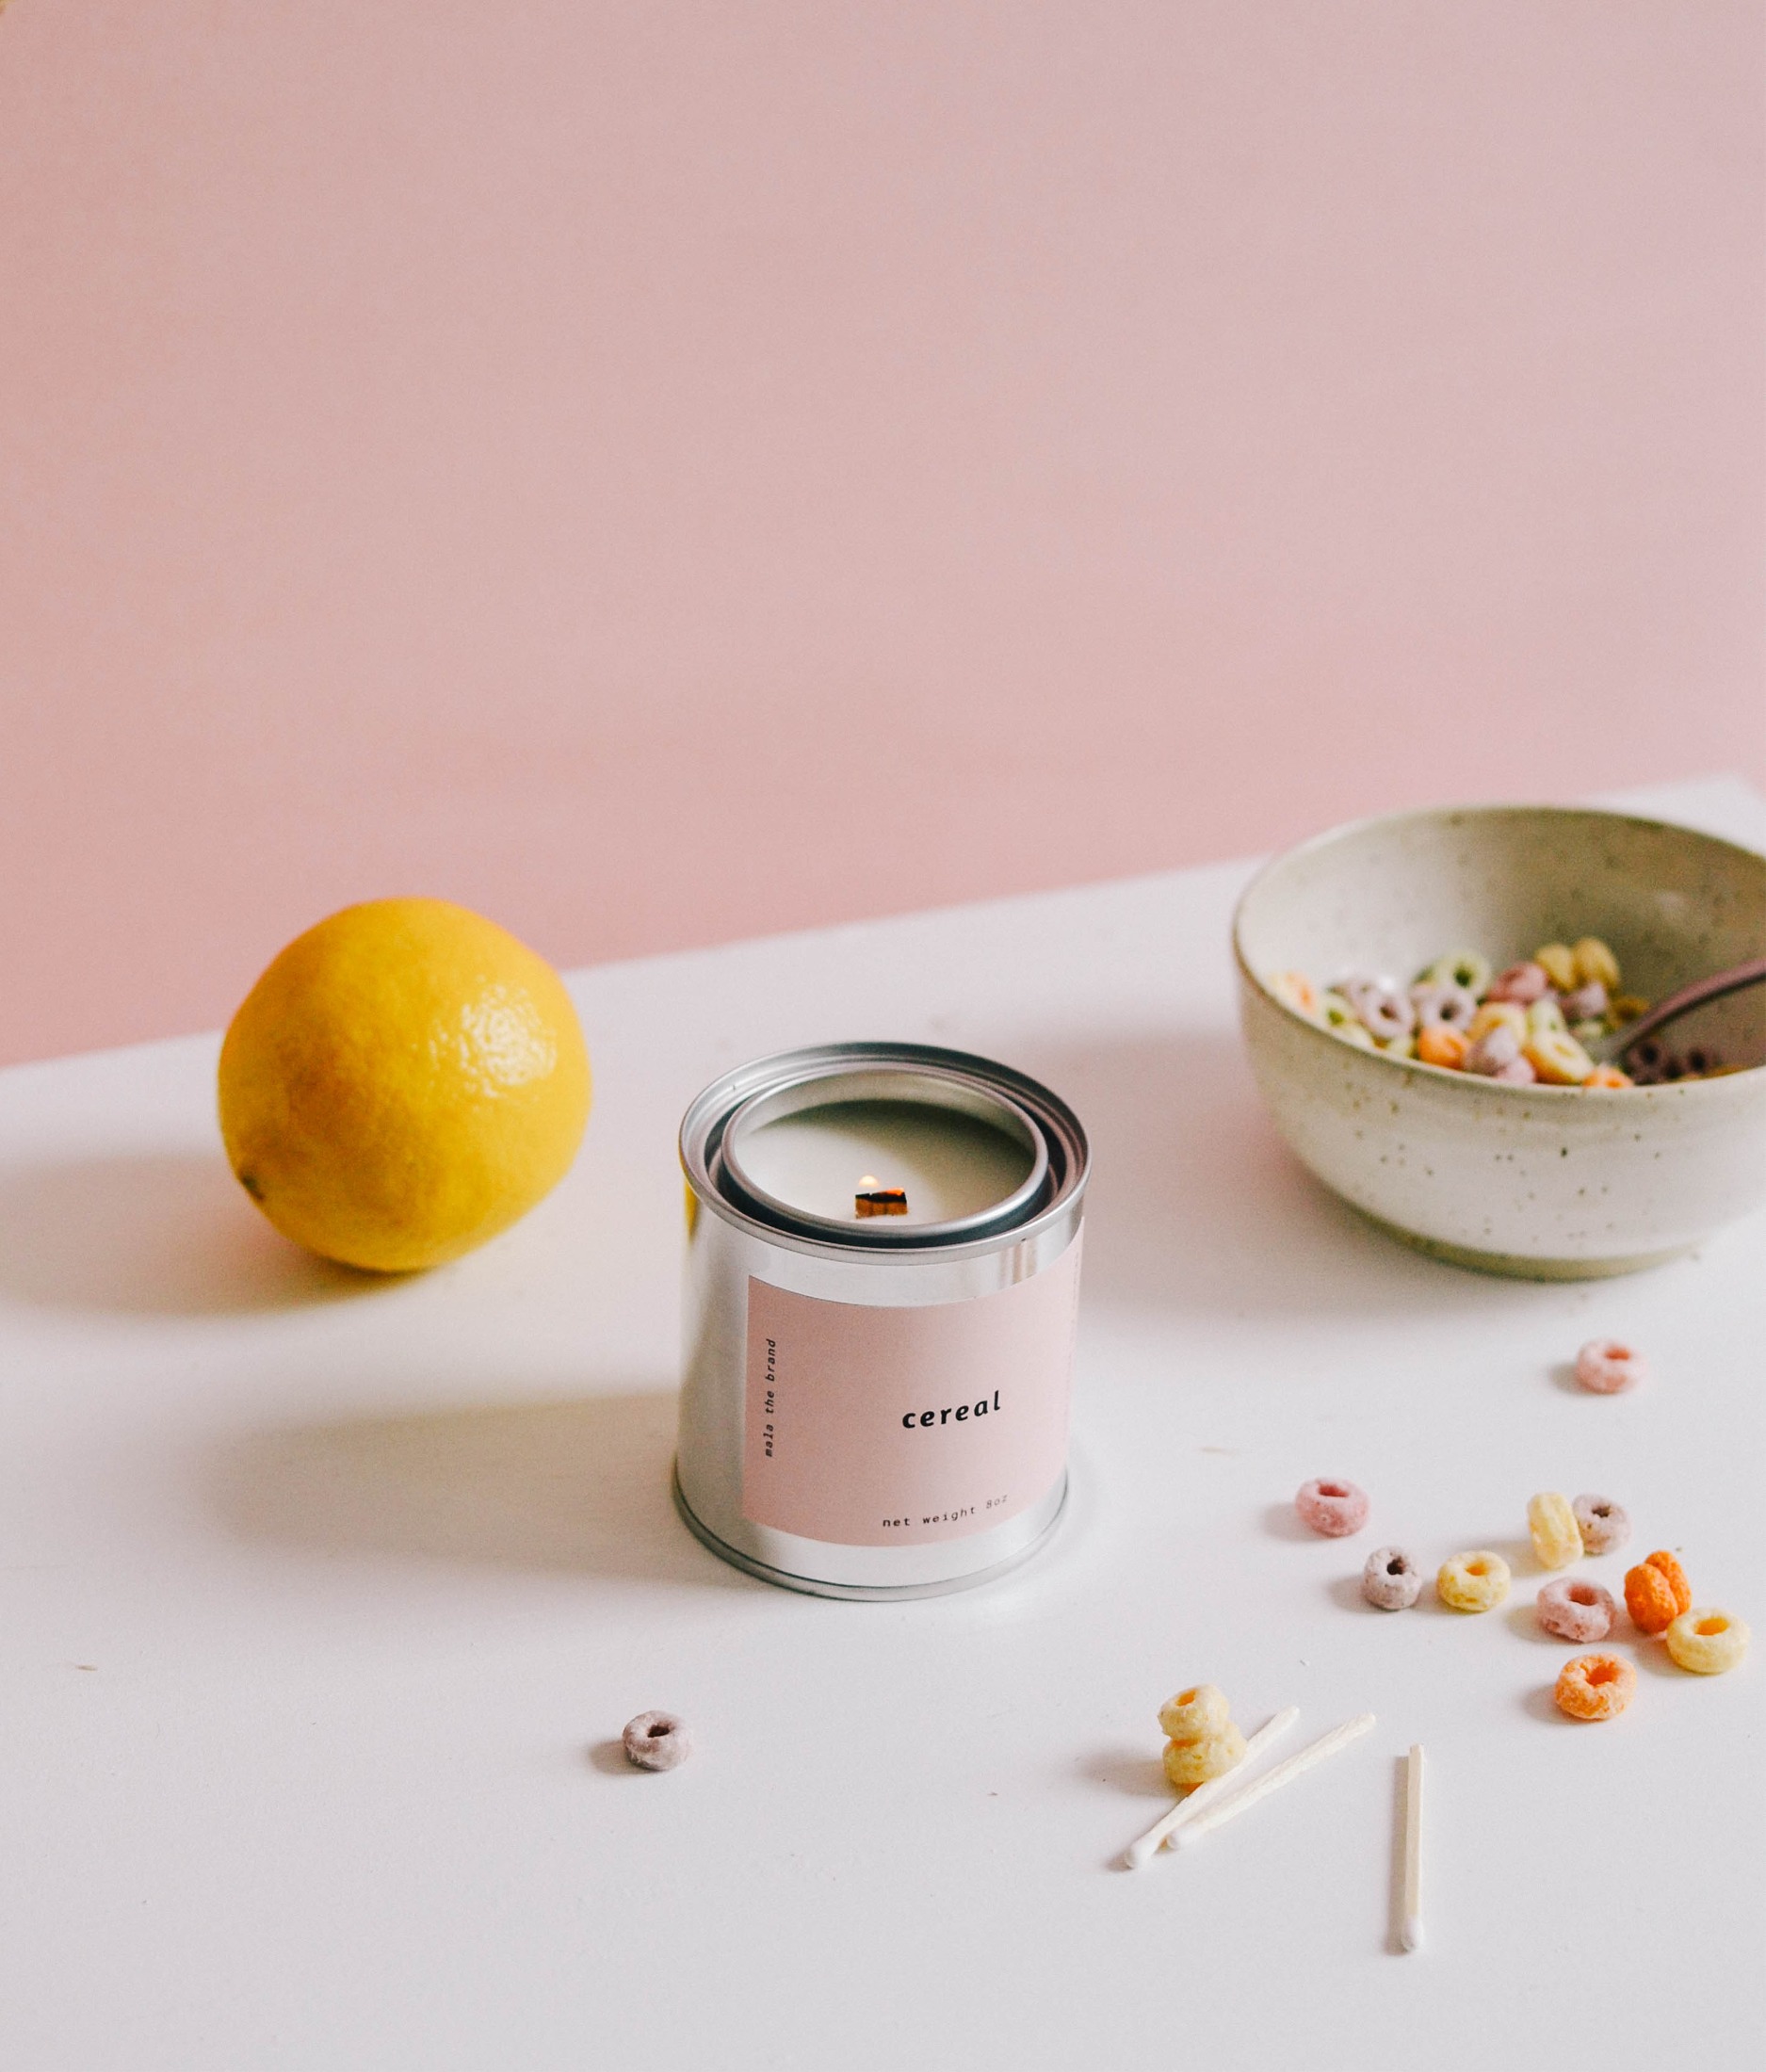 Mala the Brand candles